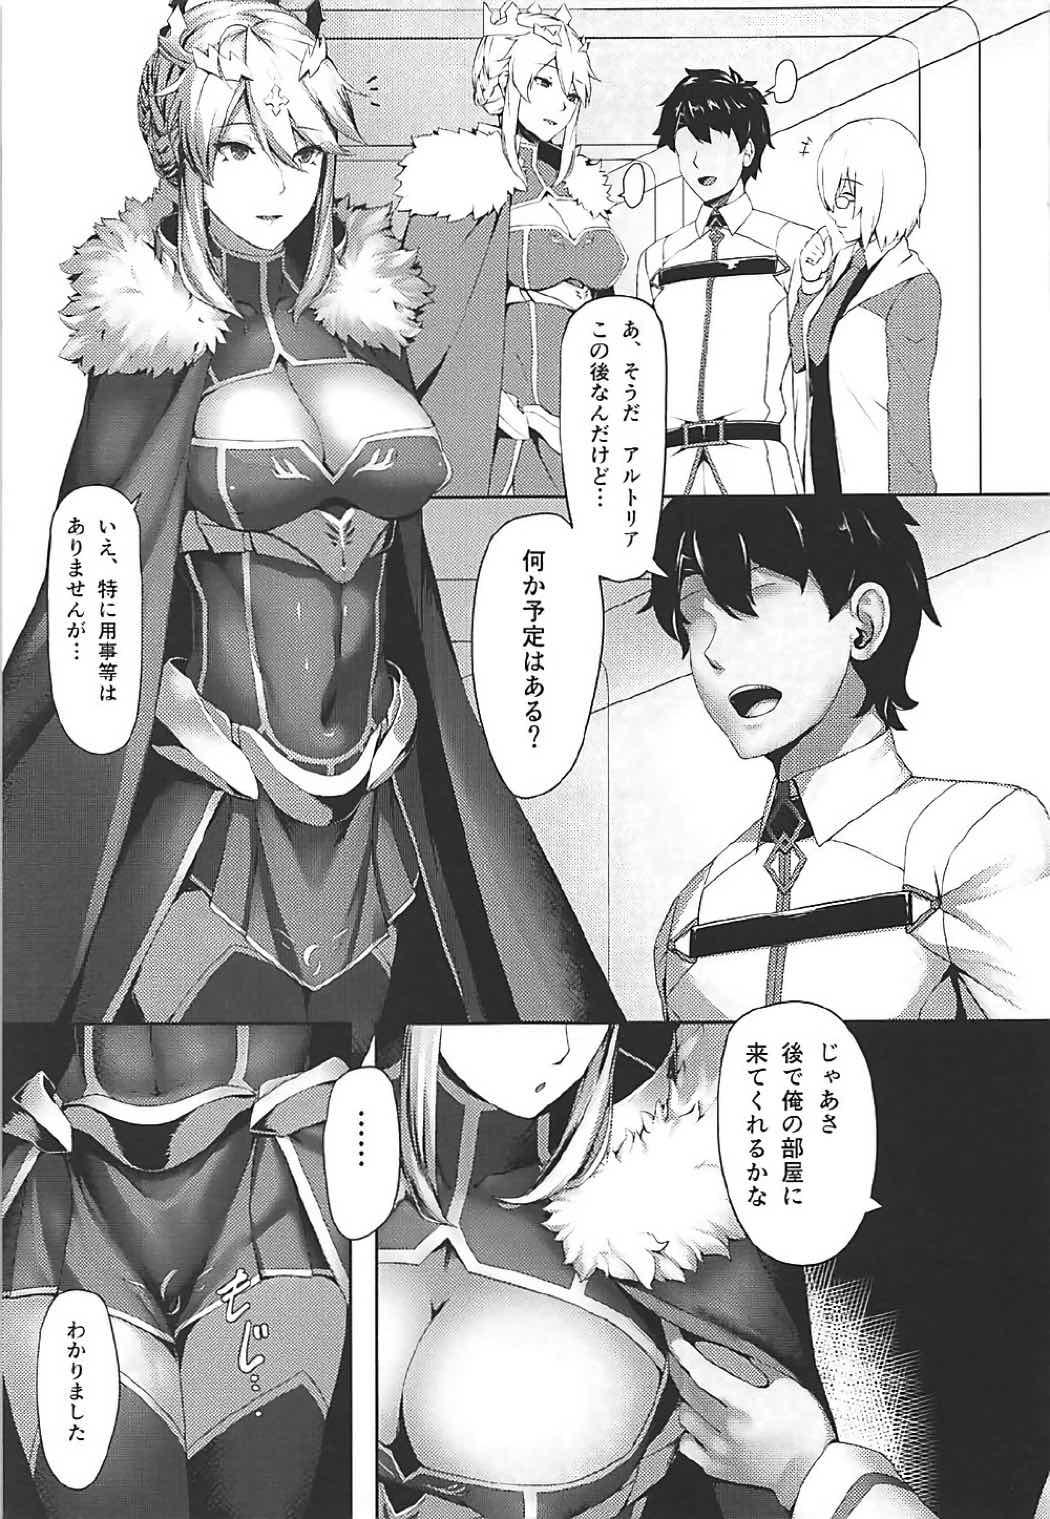 Amature Sex What do you like? - Fate grand order Sex Tape - Page 2